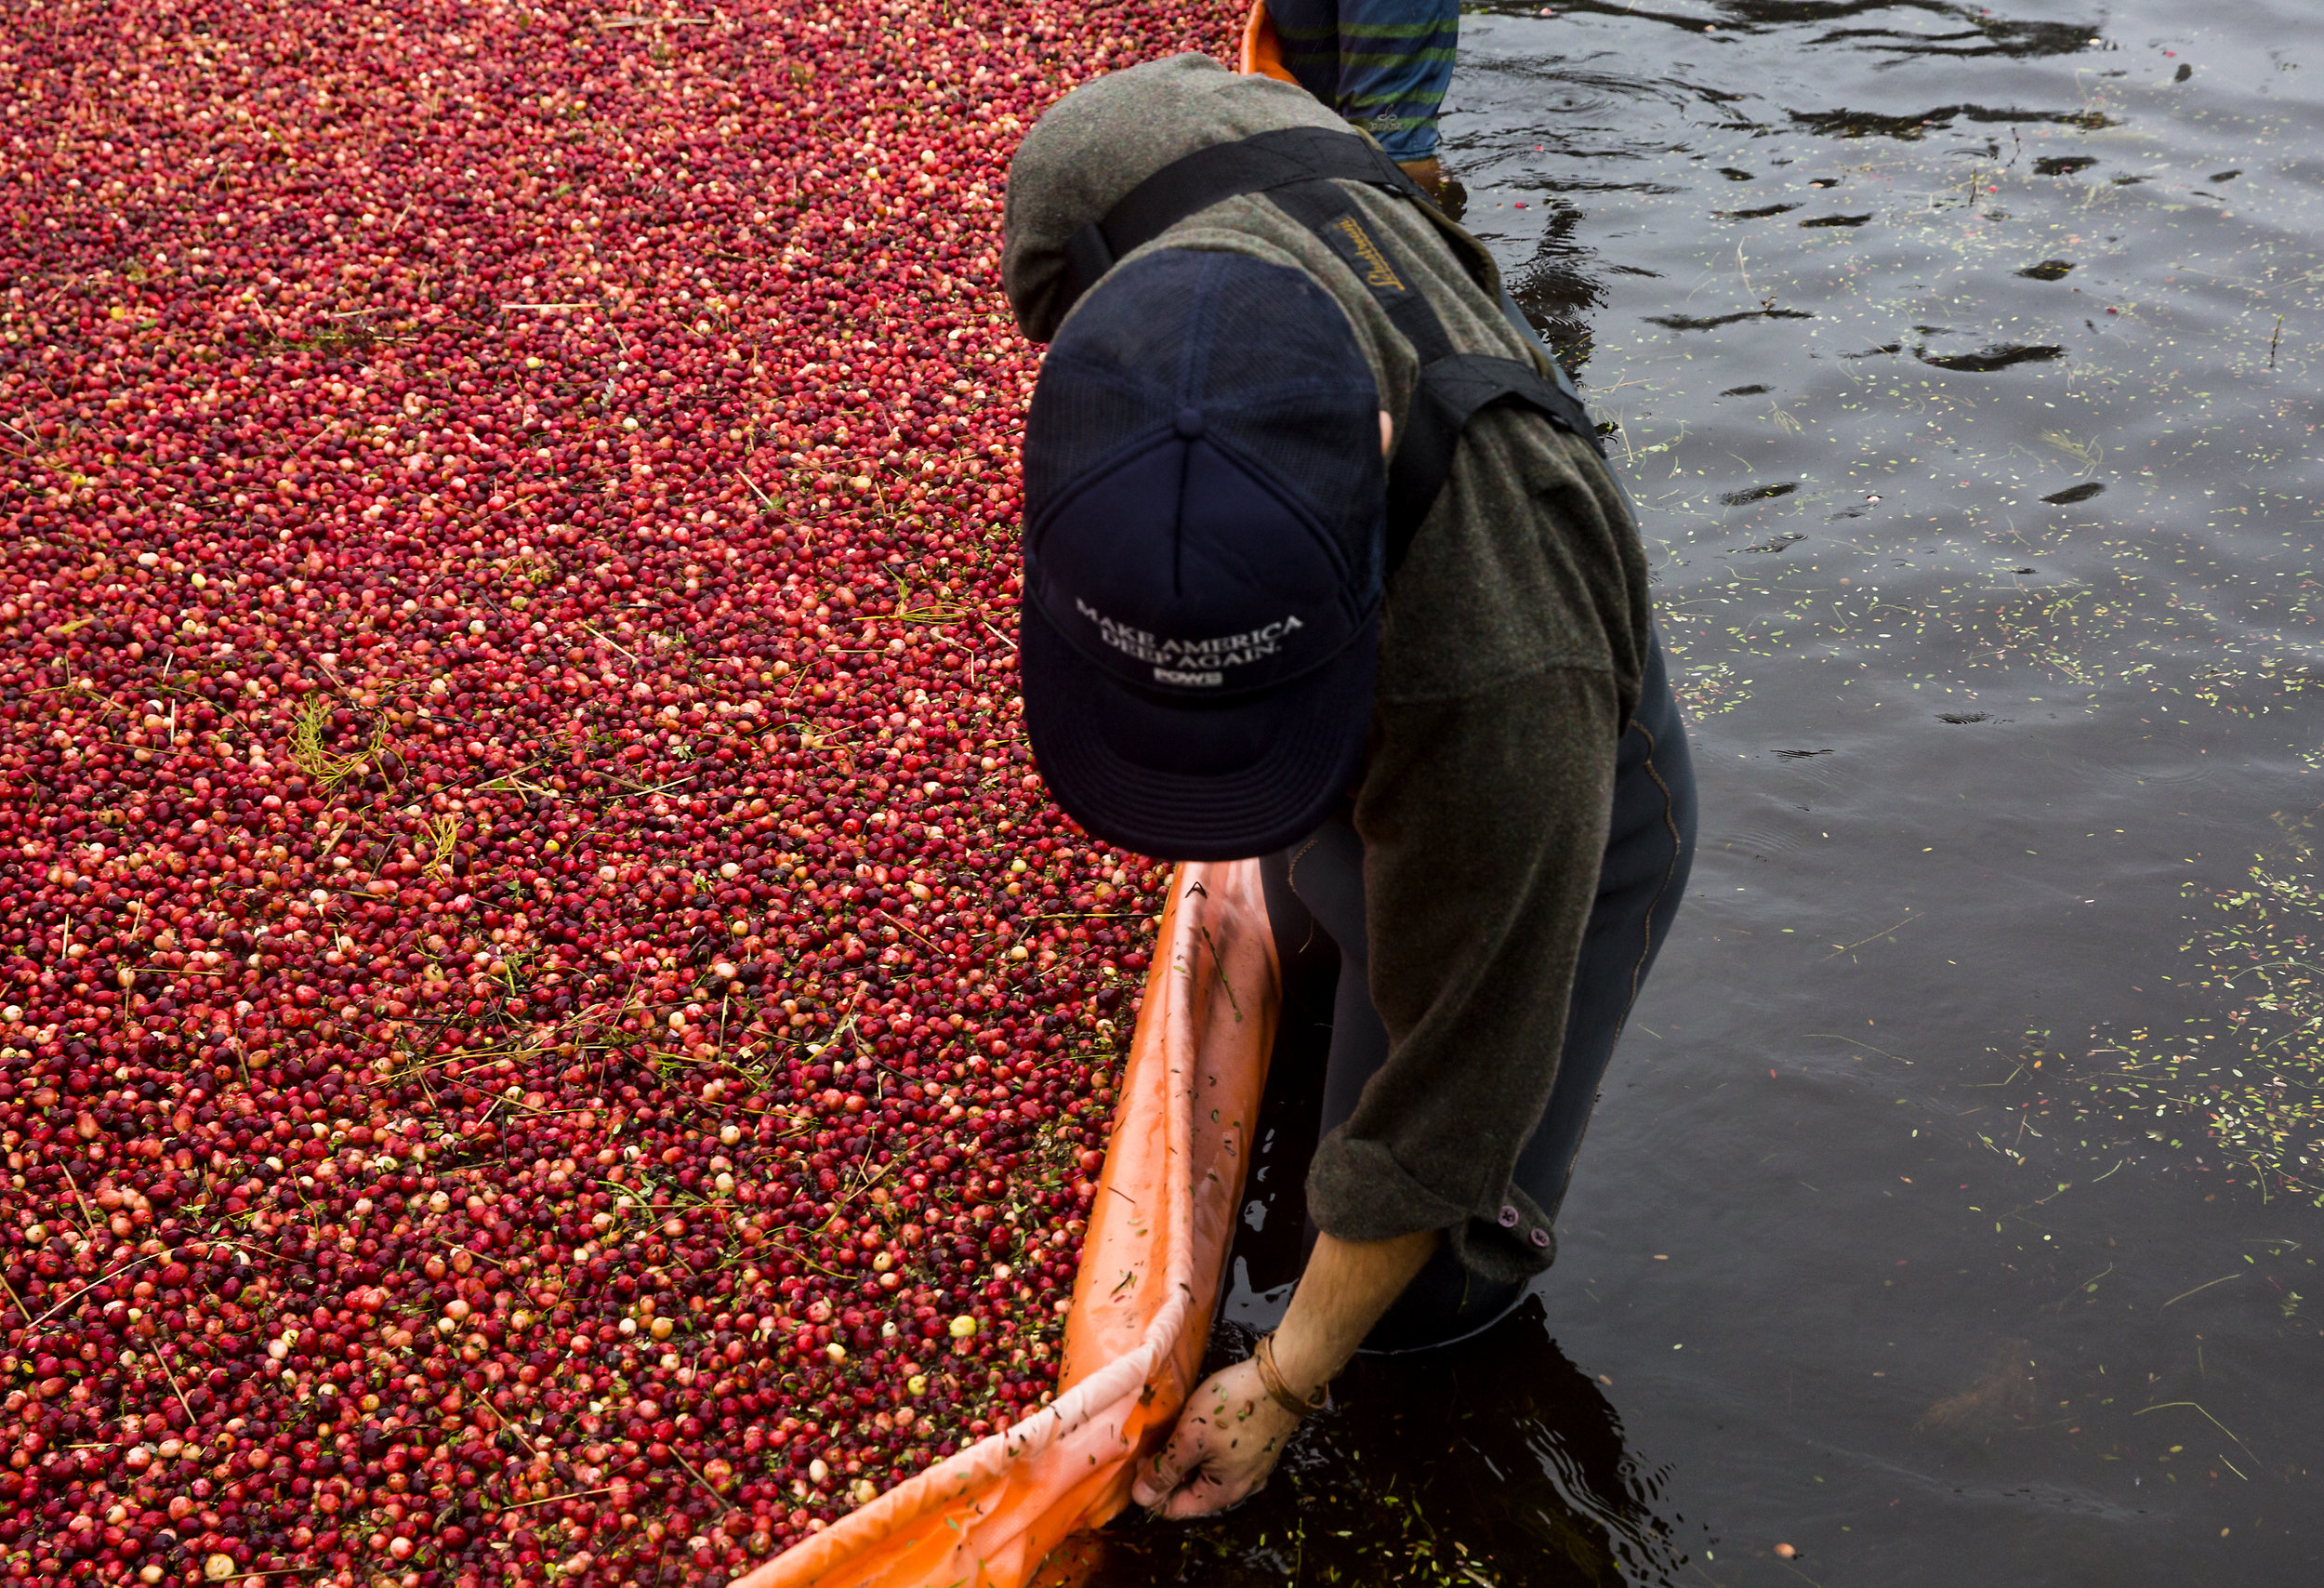  Volunteers corral the floating cranberries with a floating boom and metal rakes during the annual harvest at Starvation Alley Farms. (Sy Bean / Seattle Refined) 